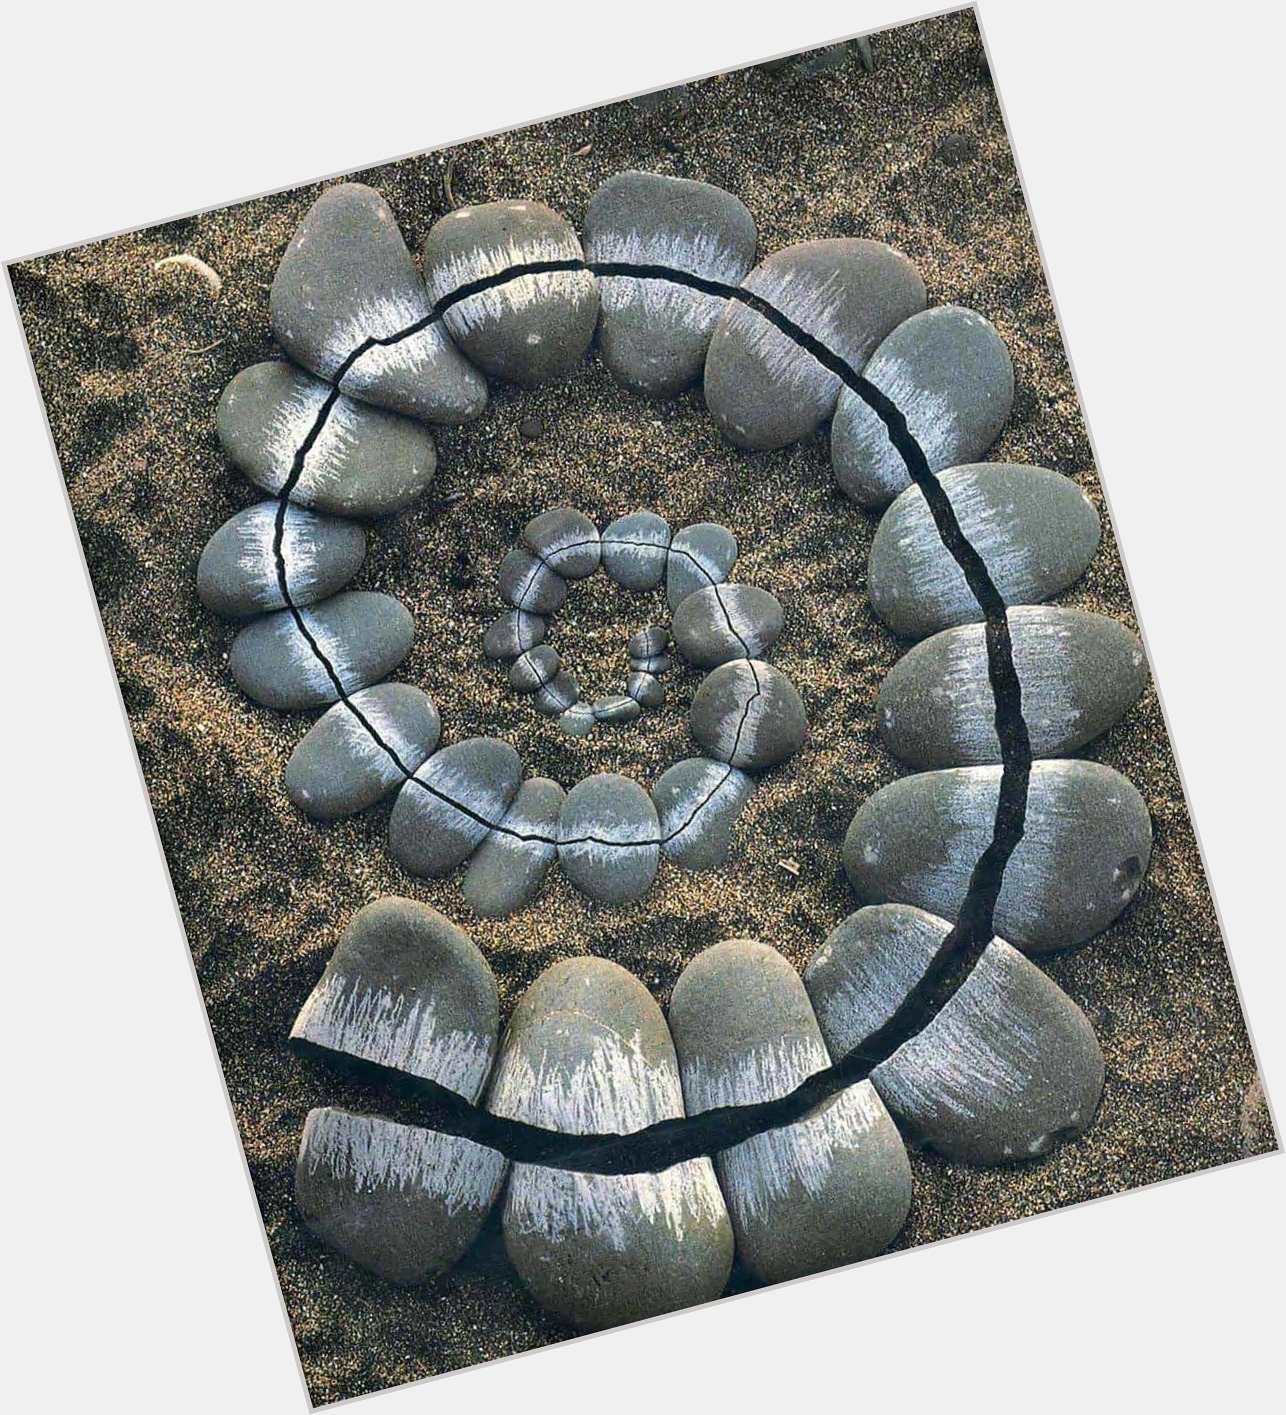 Andy Goldsworthy dating 2